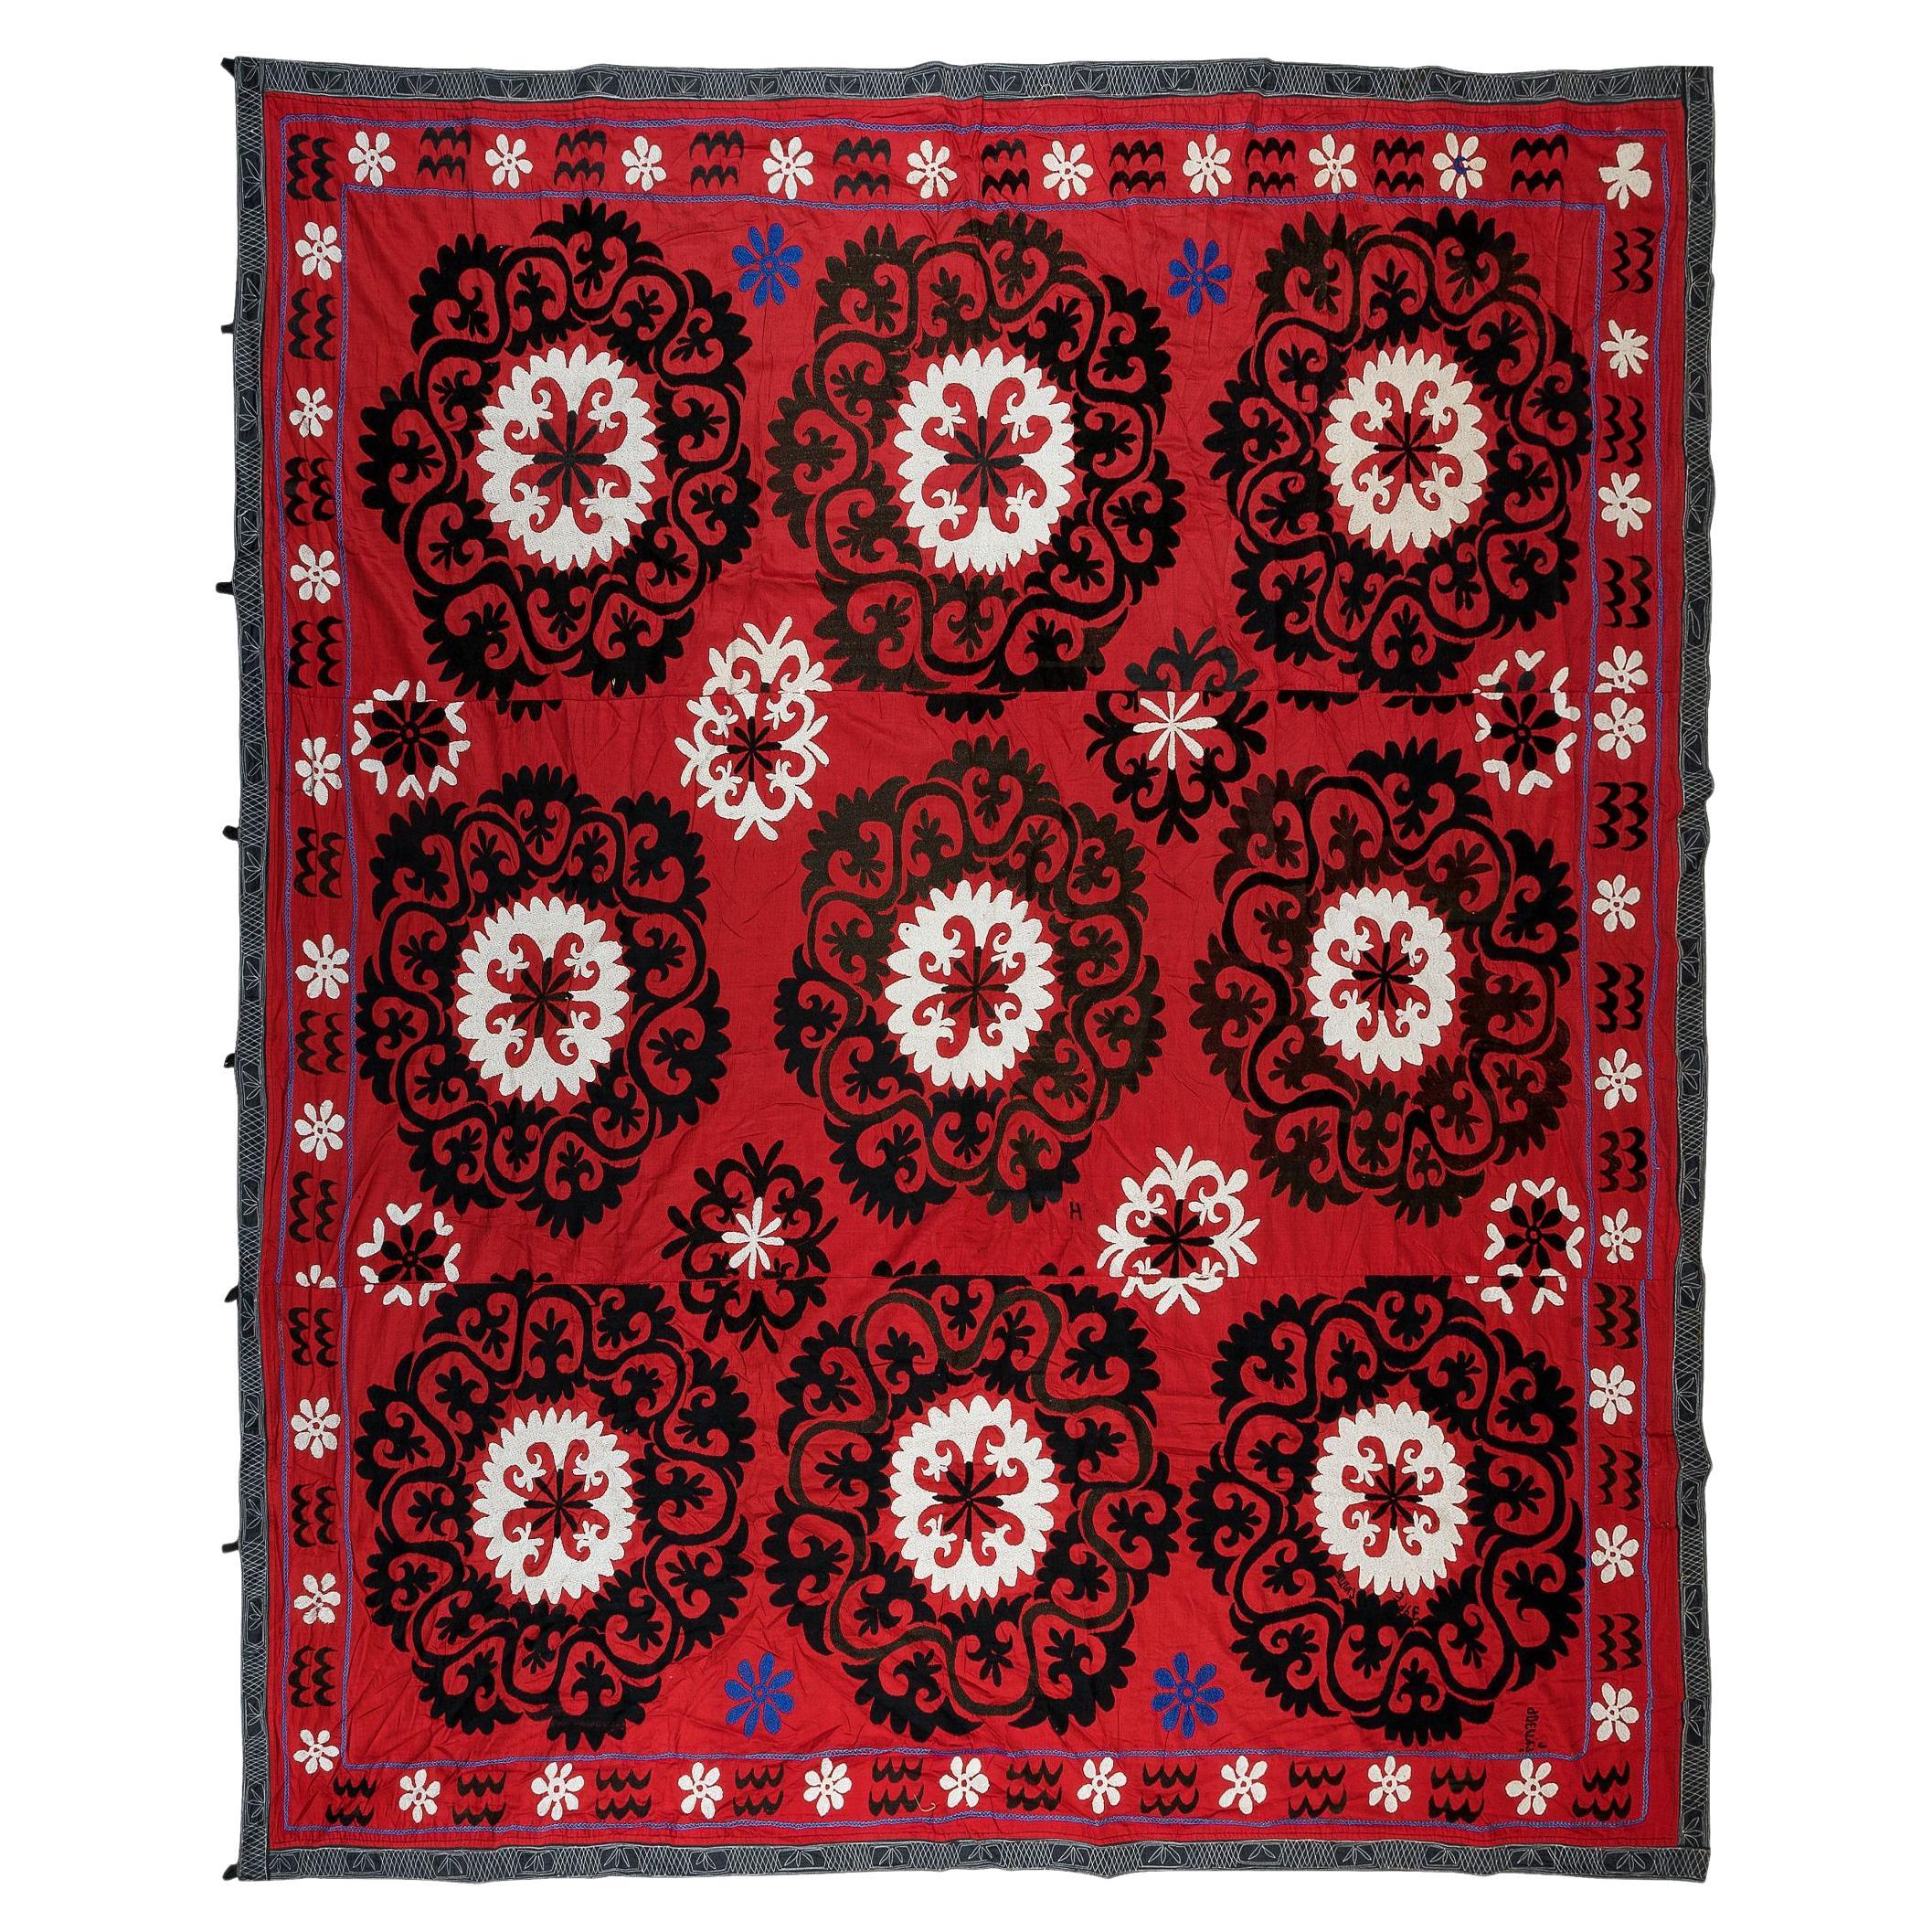 Vintage Silk Embroidery Bed Cover, Uzbek Suzani Wall Hanging in Red For Sale